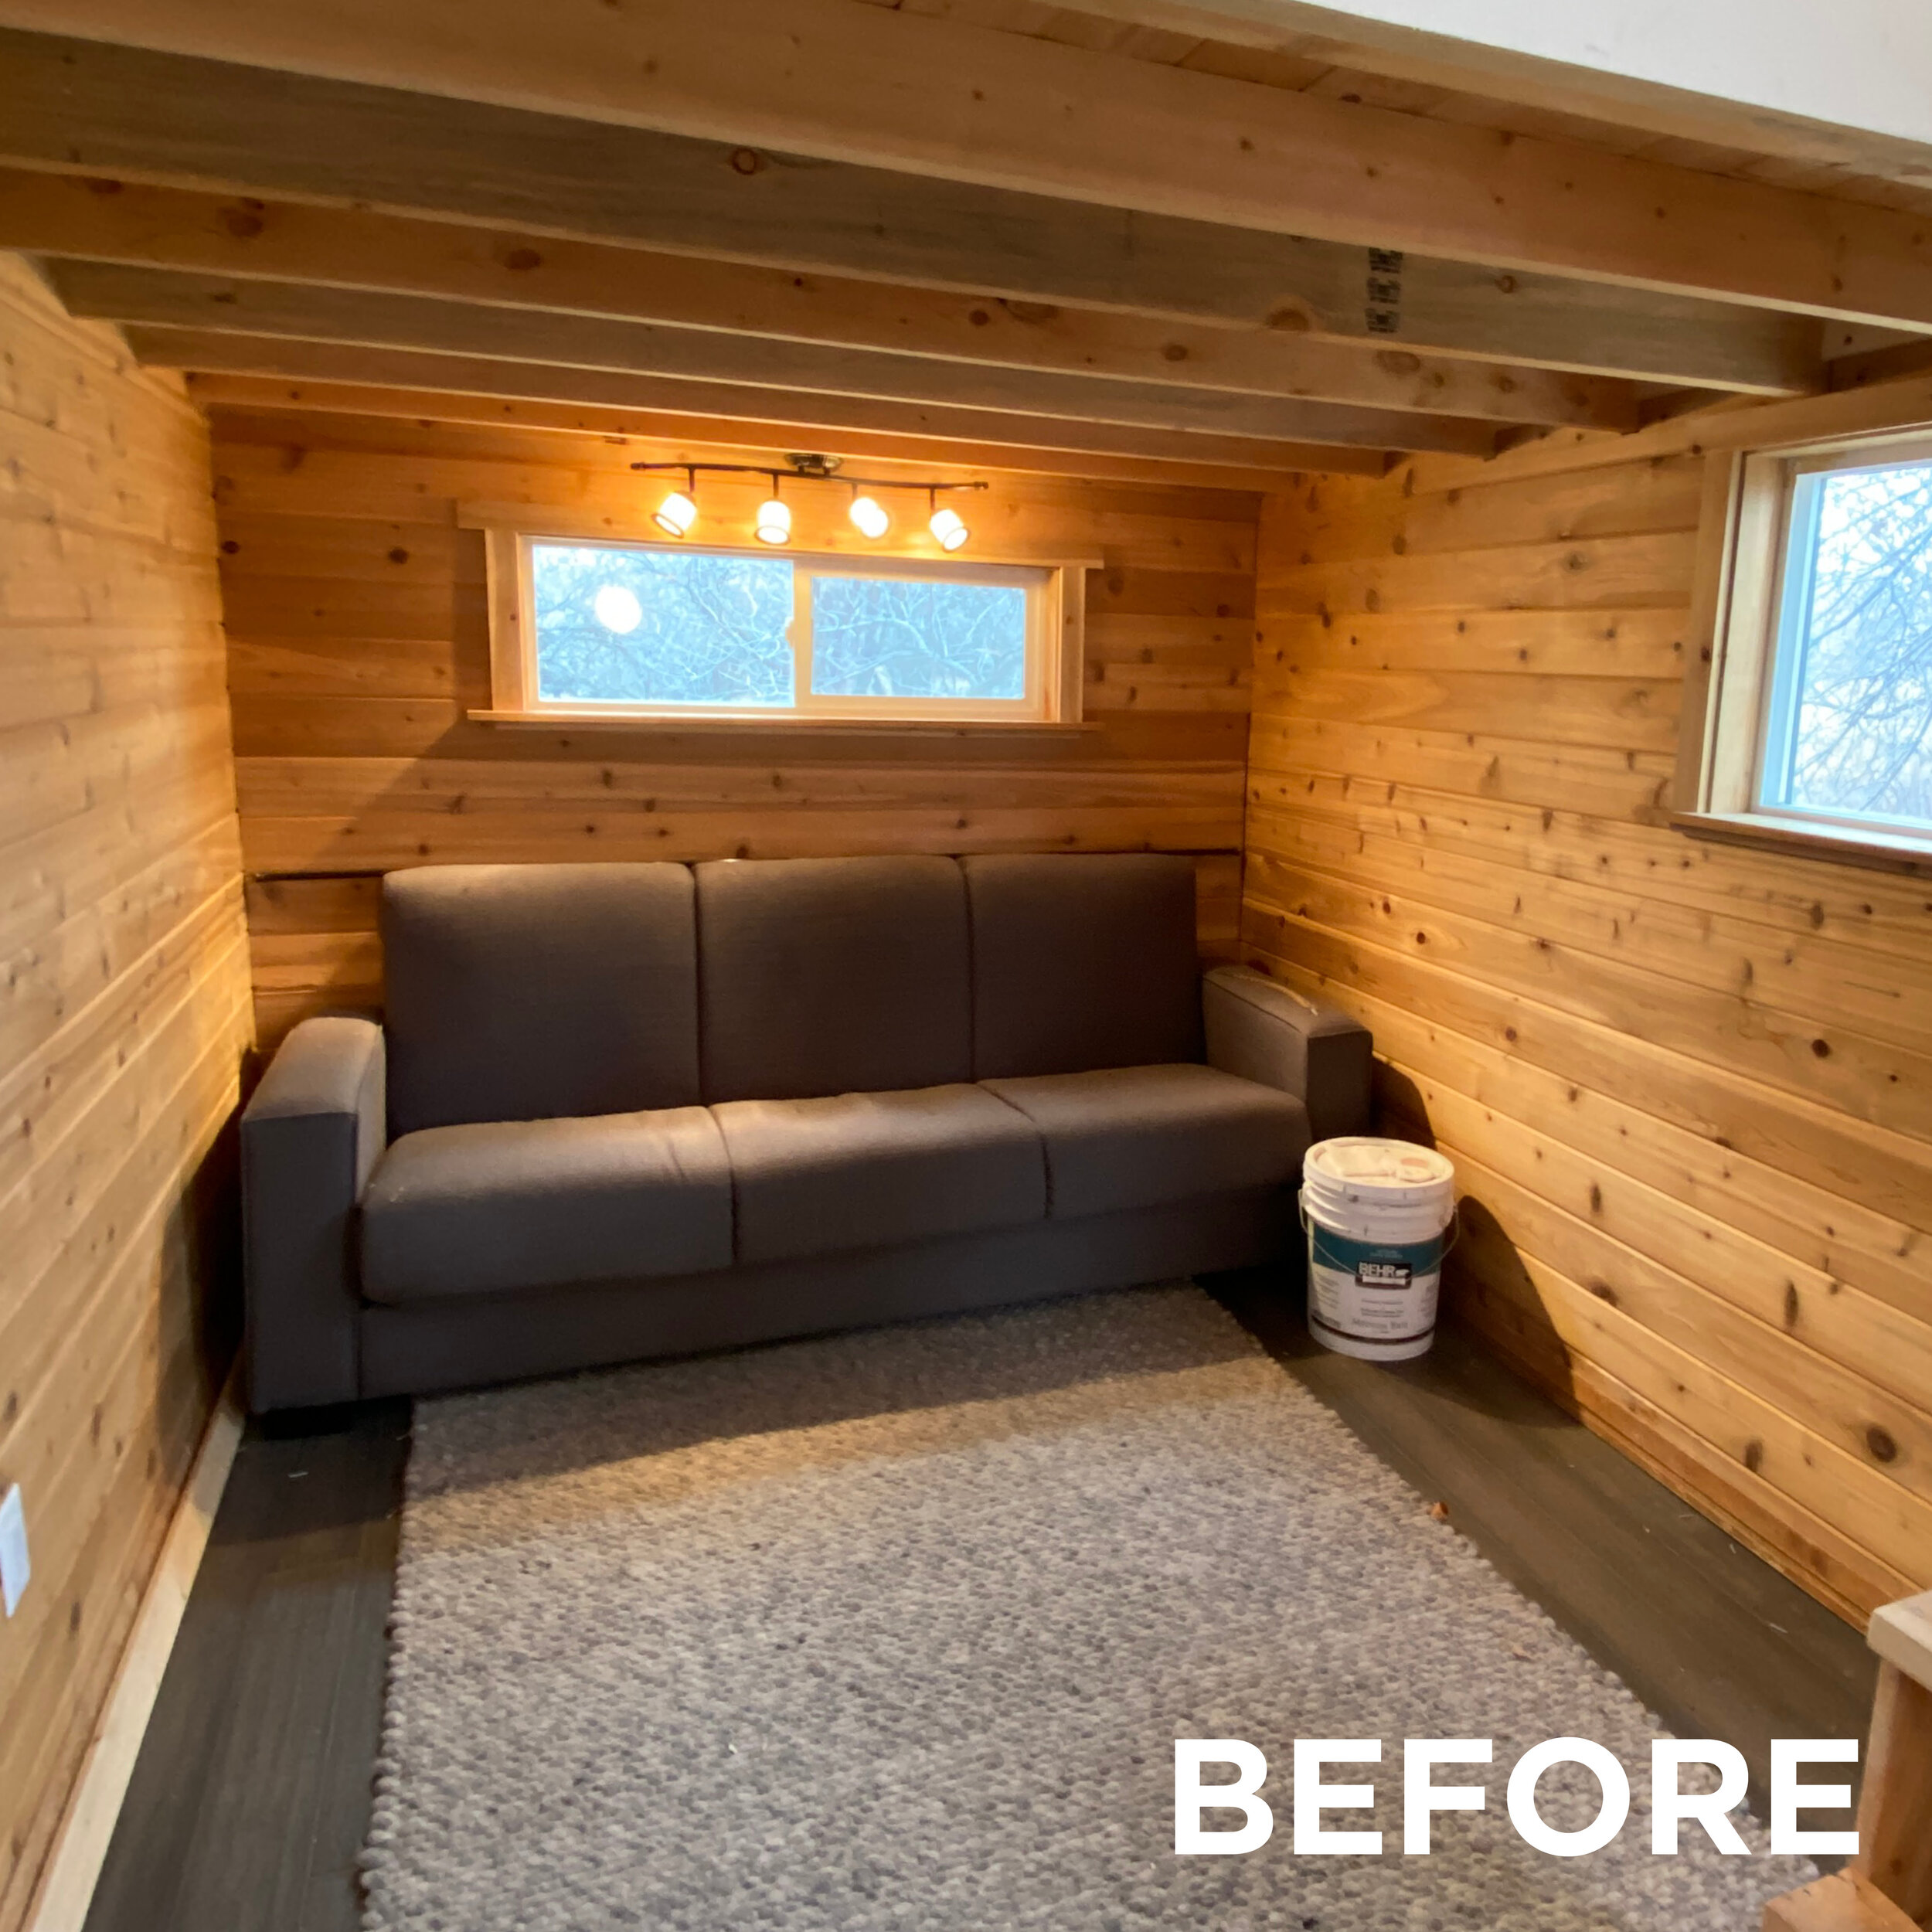 BEFORE & AFTER MARY TINY HOUSE.jpg